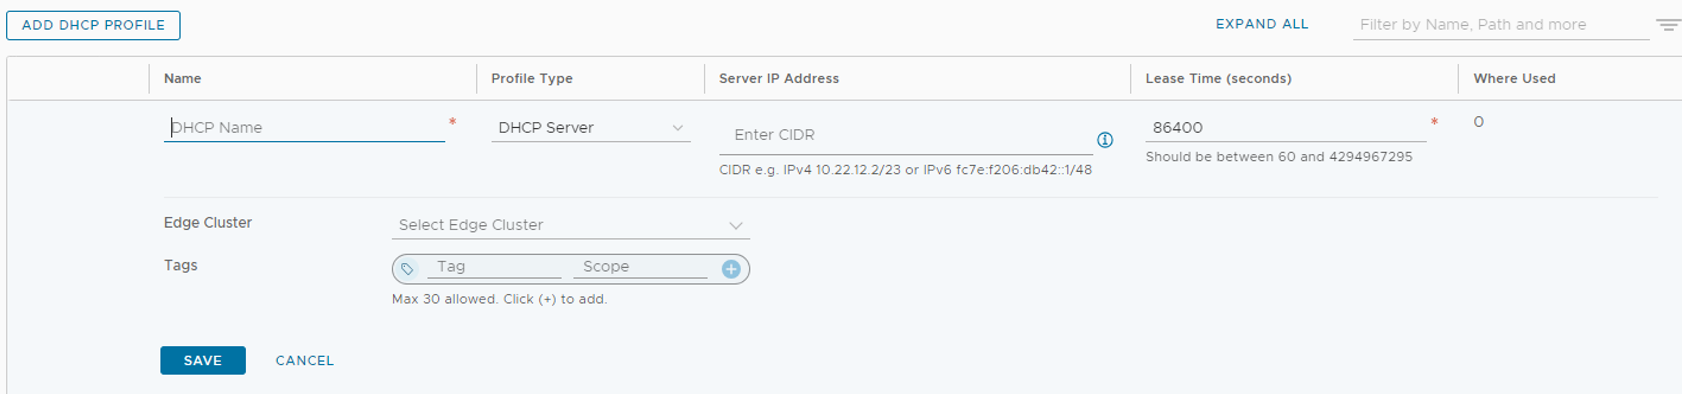 Screenshot showing how to add a DHCP Profile in NSX Manager.